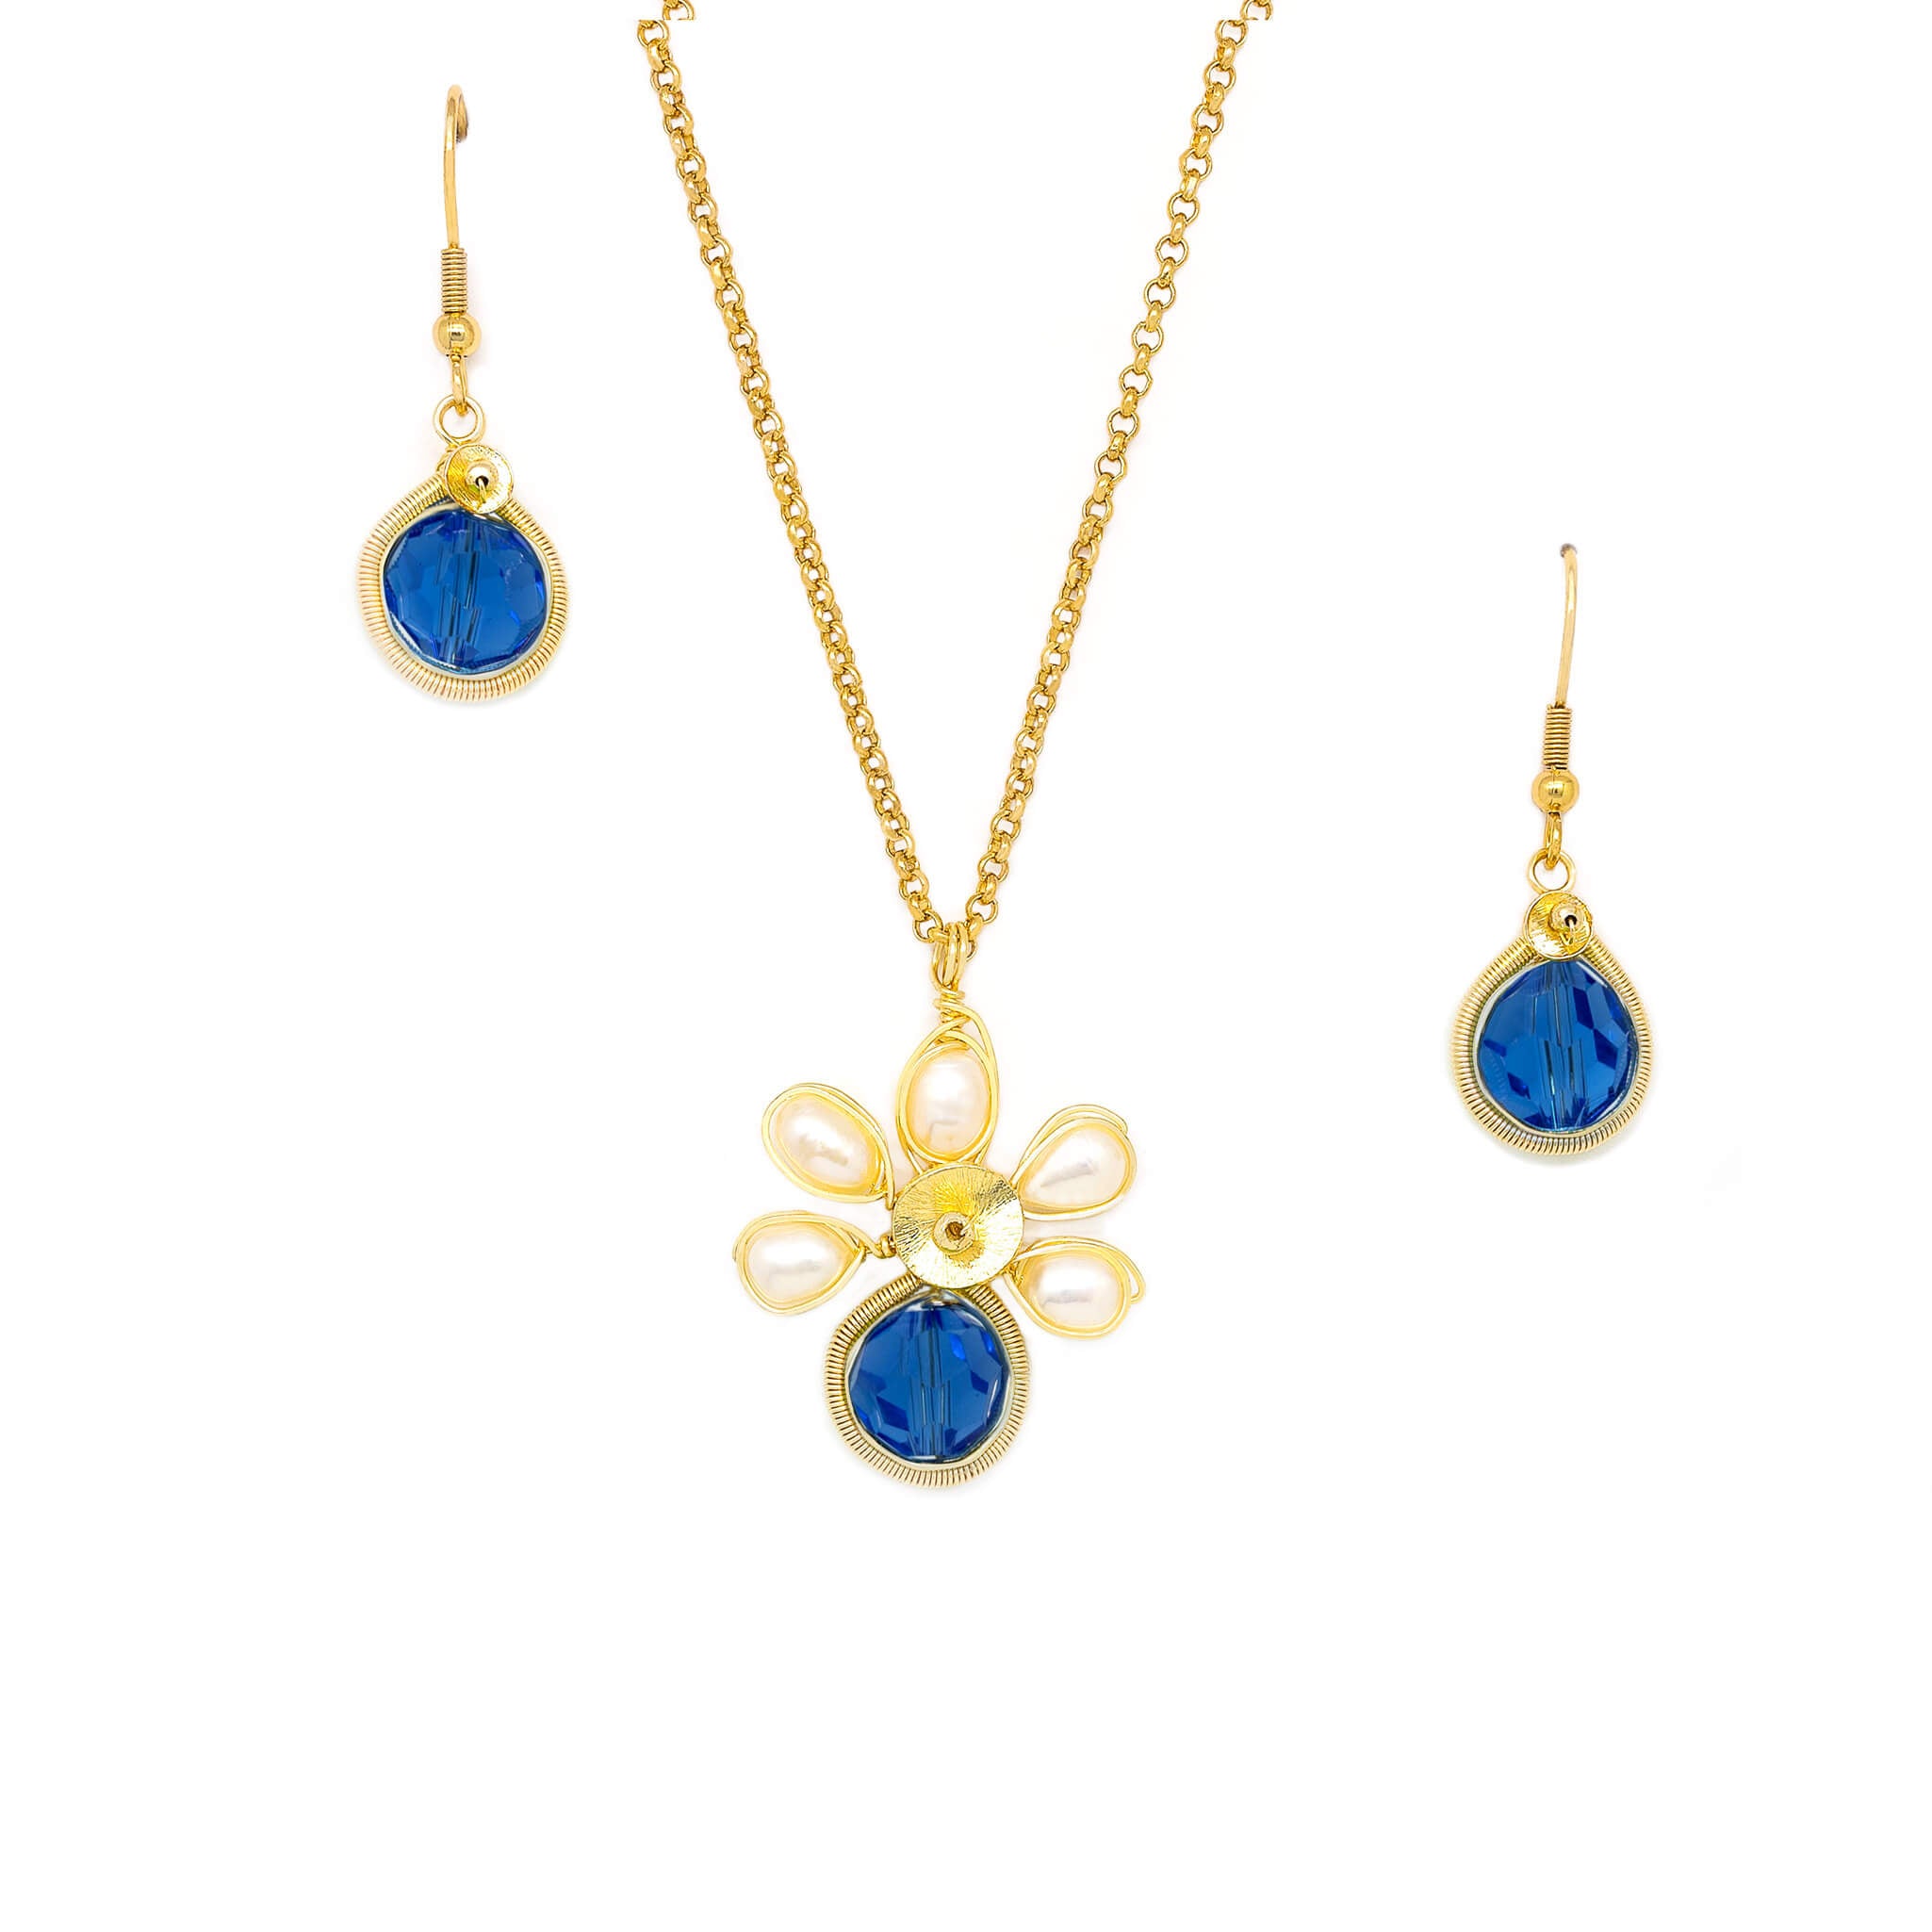 Sapphire Cz drops necklace and earrings -